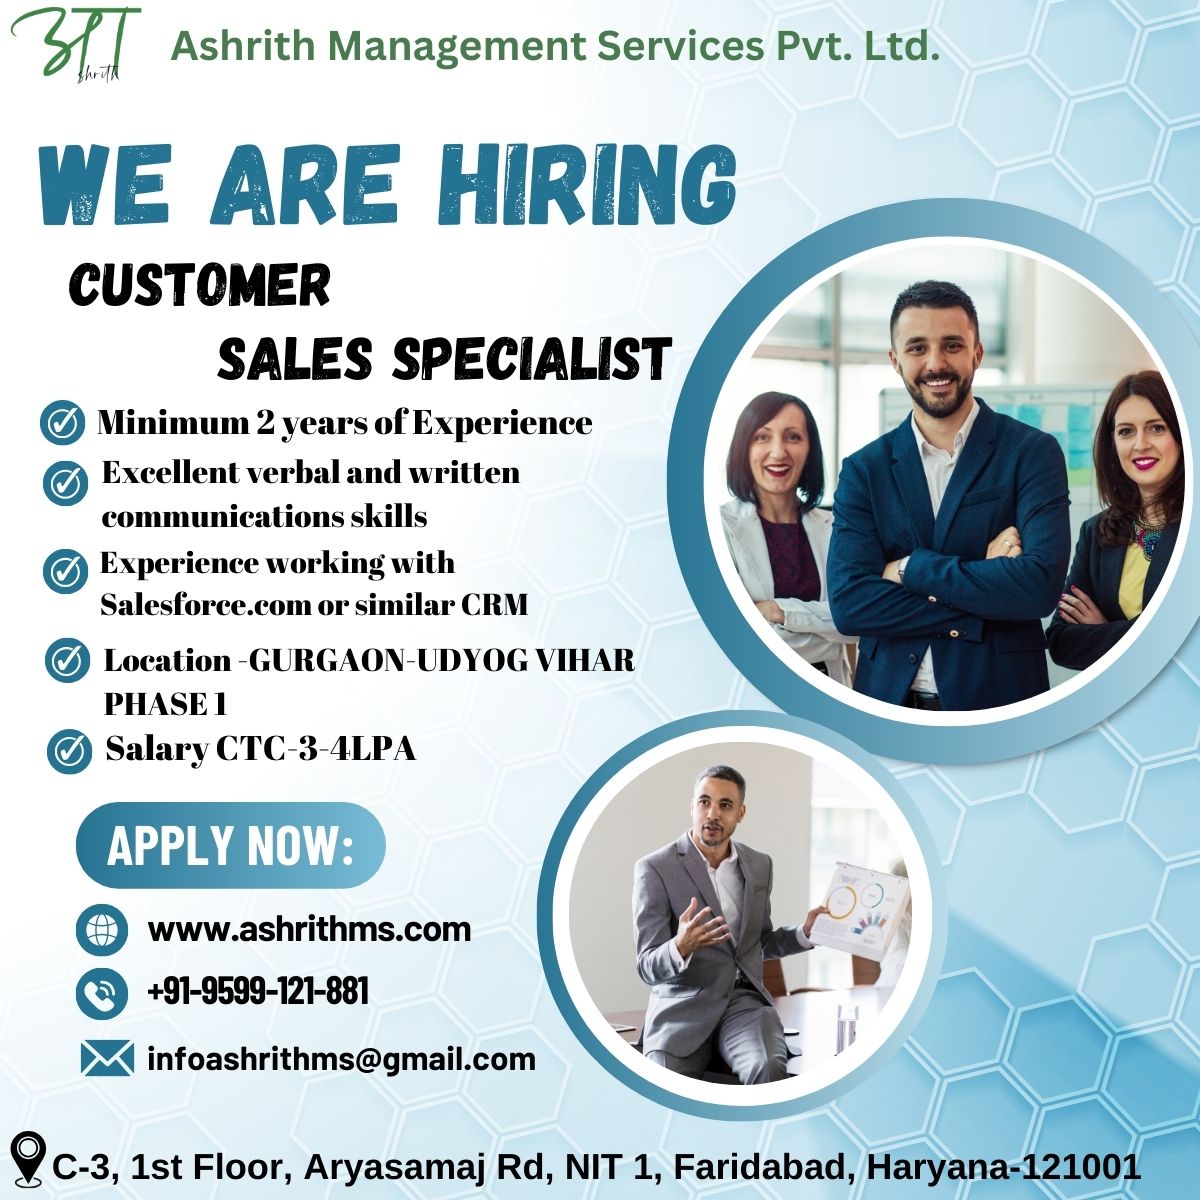 Explore exciting opportunities and shape the future of sales in Gurgaon.

#InsideSales #GurgaonJobs #HiringNow #InsideSalesJobs #GurgaonHiring #SalesCareer #GurgaonOpportunities #JobSearch #CareerGrowth #SalesJobs #GurgaonCareers #HiringNow #JobOpening